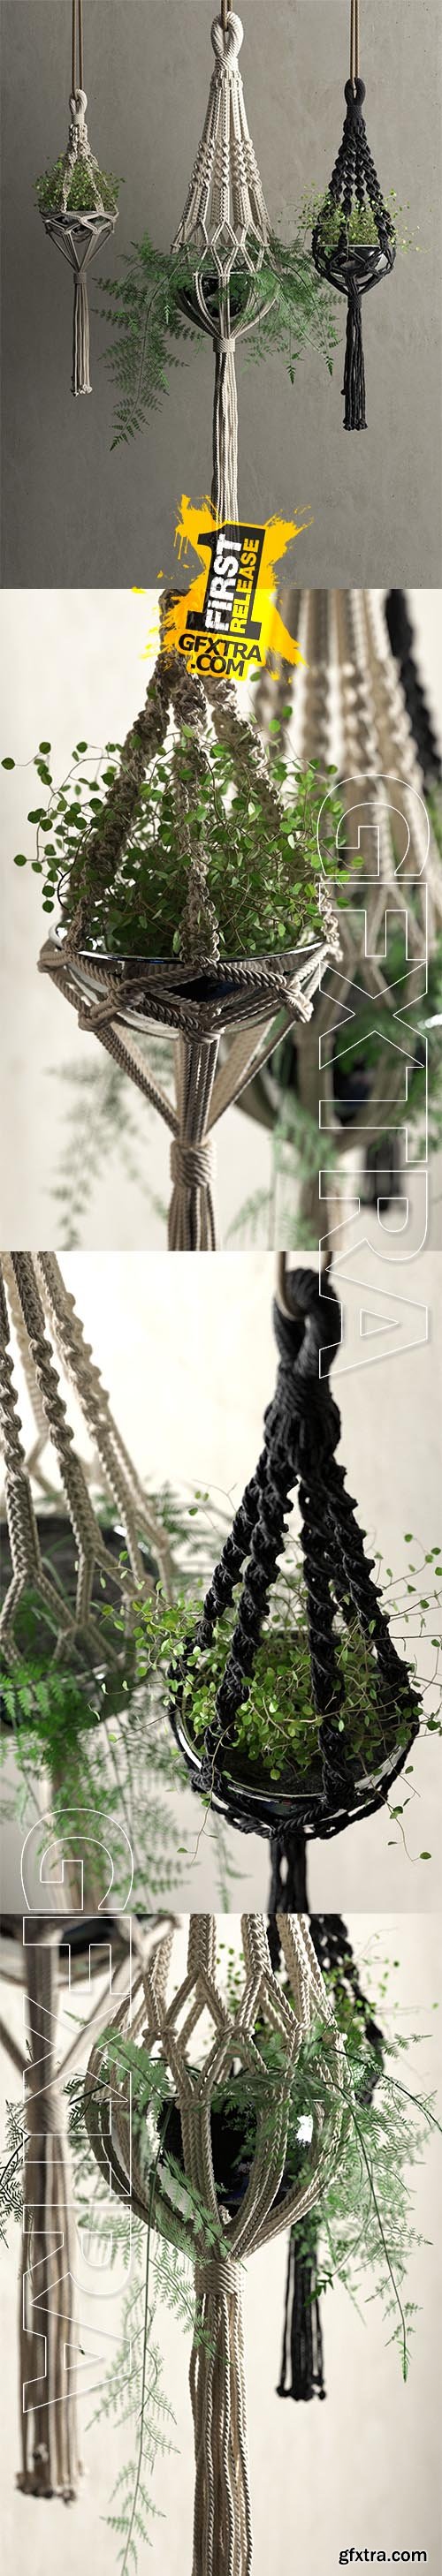 Cgtrader - Macrame Hanging Pots with Plants 3D model